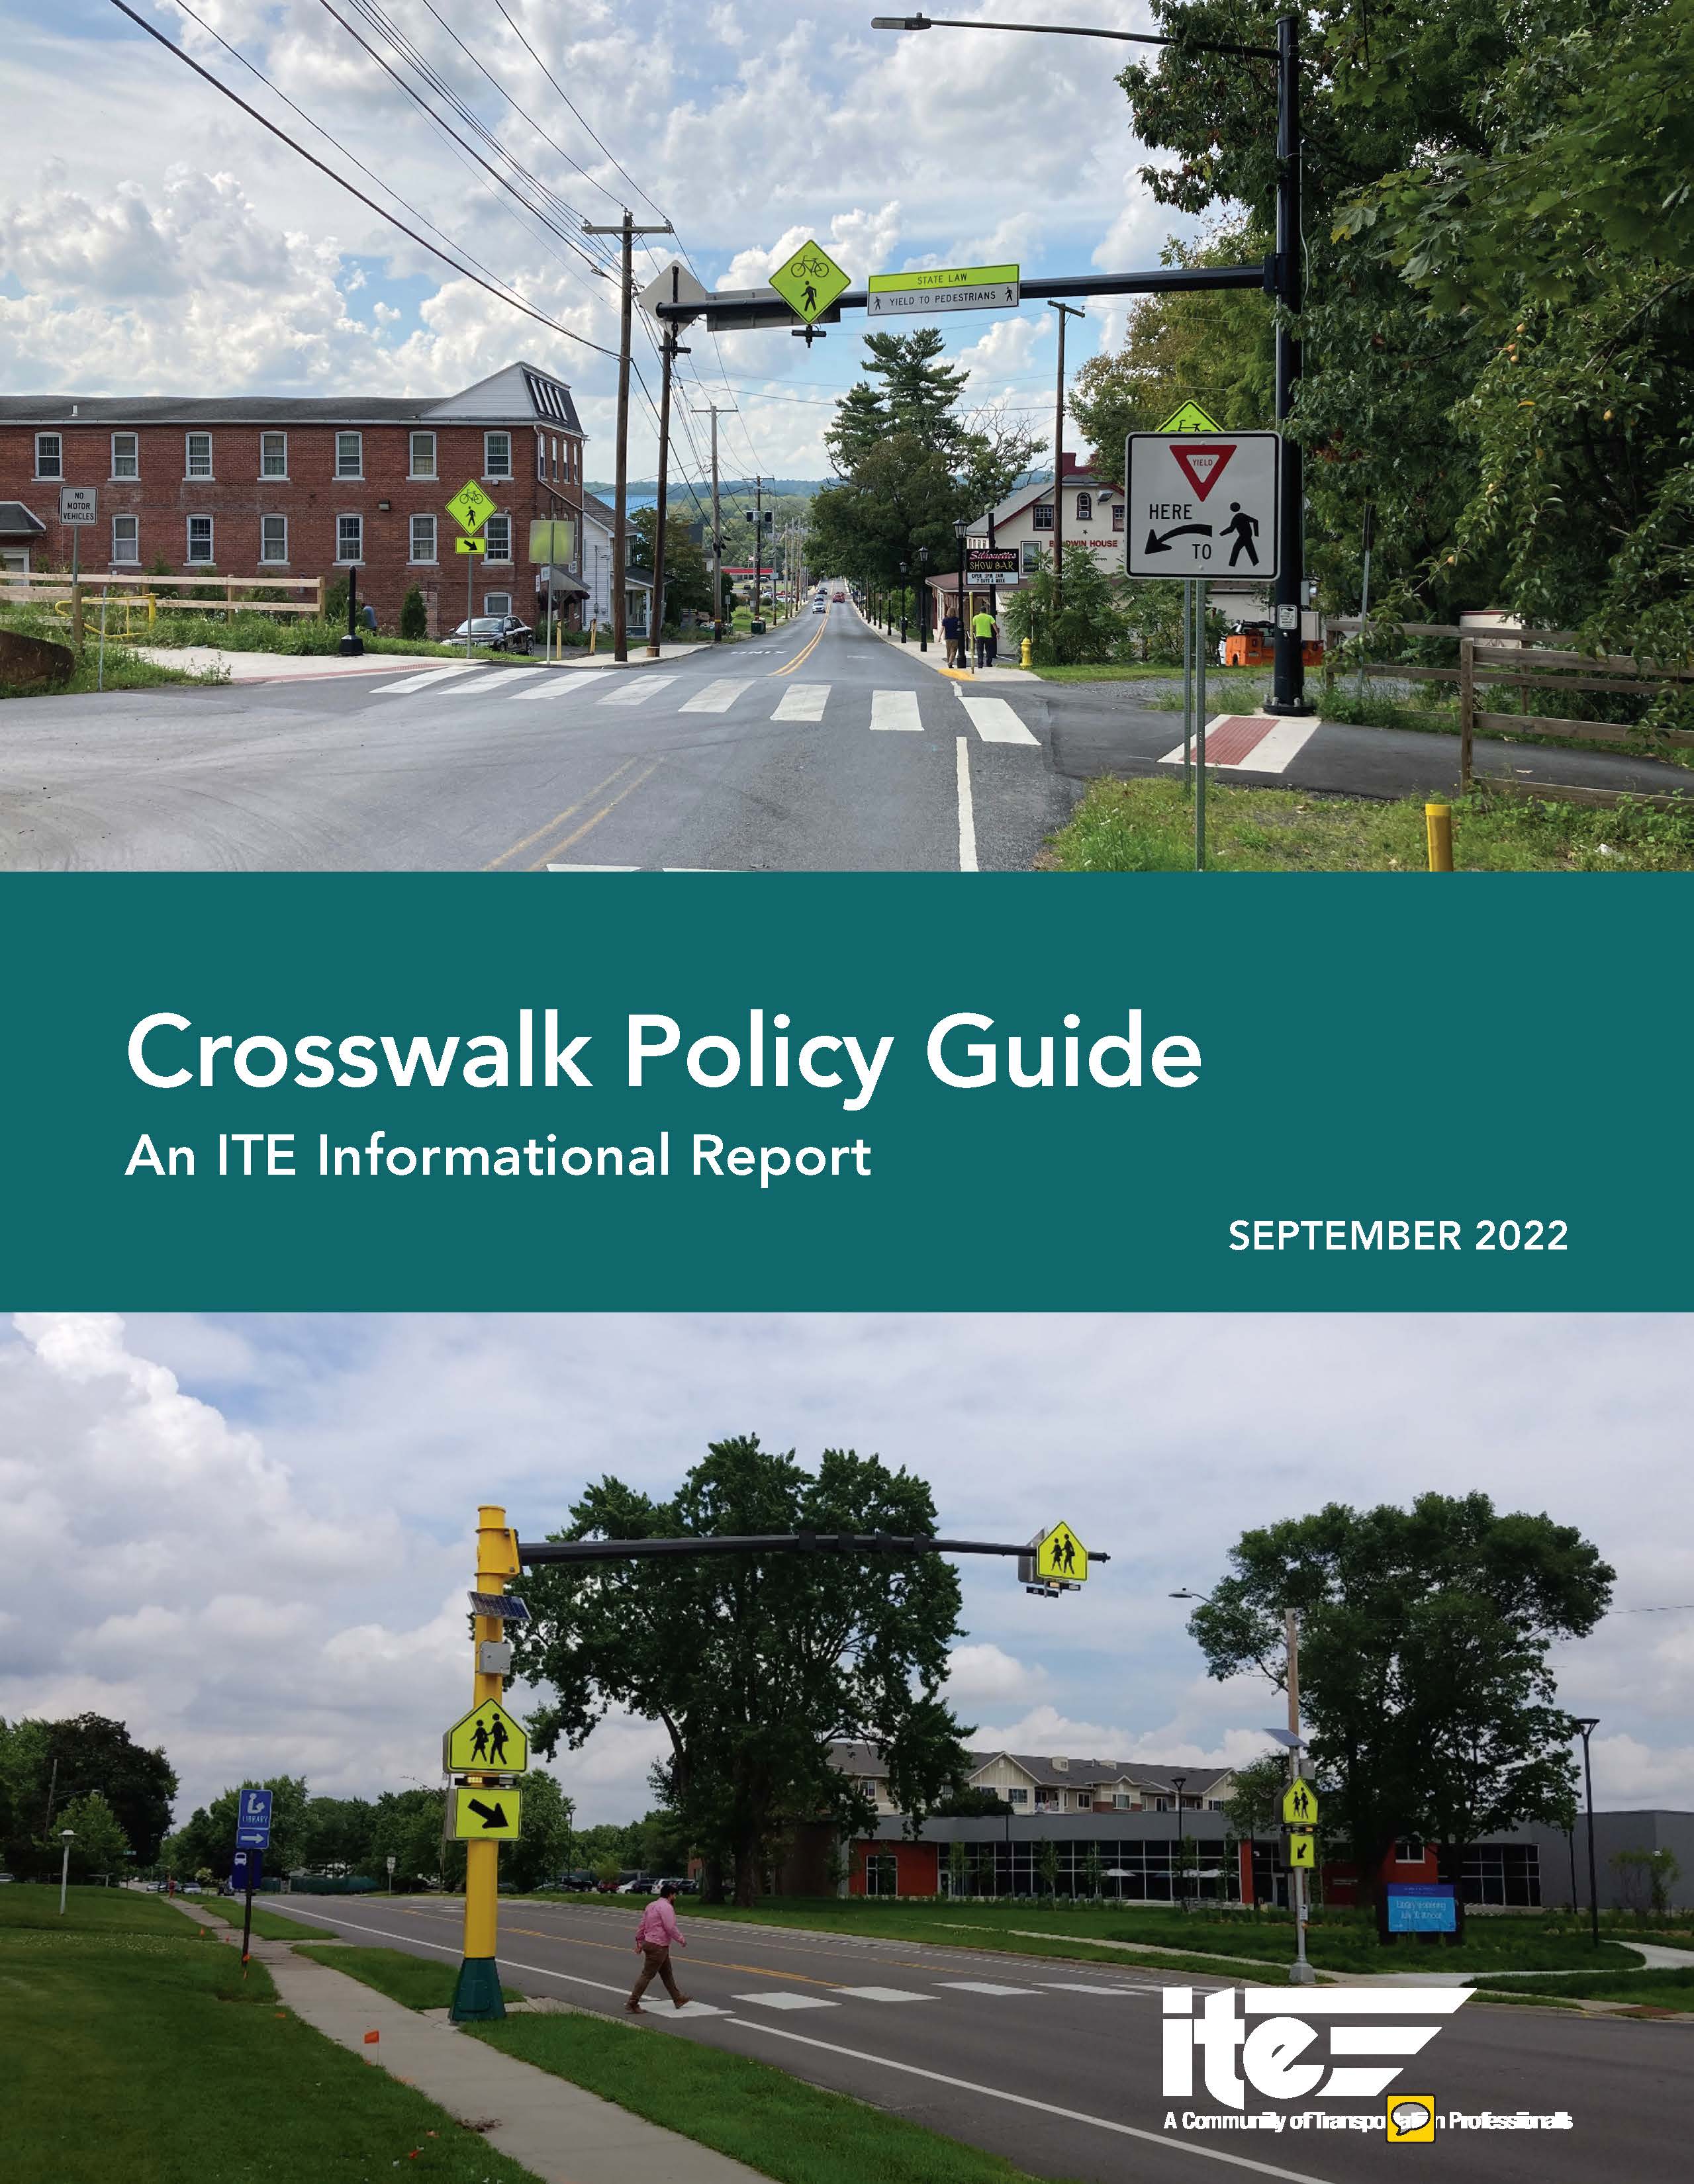 Crosswalk Policy Guide - an ITE Informational Report